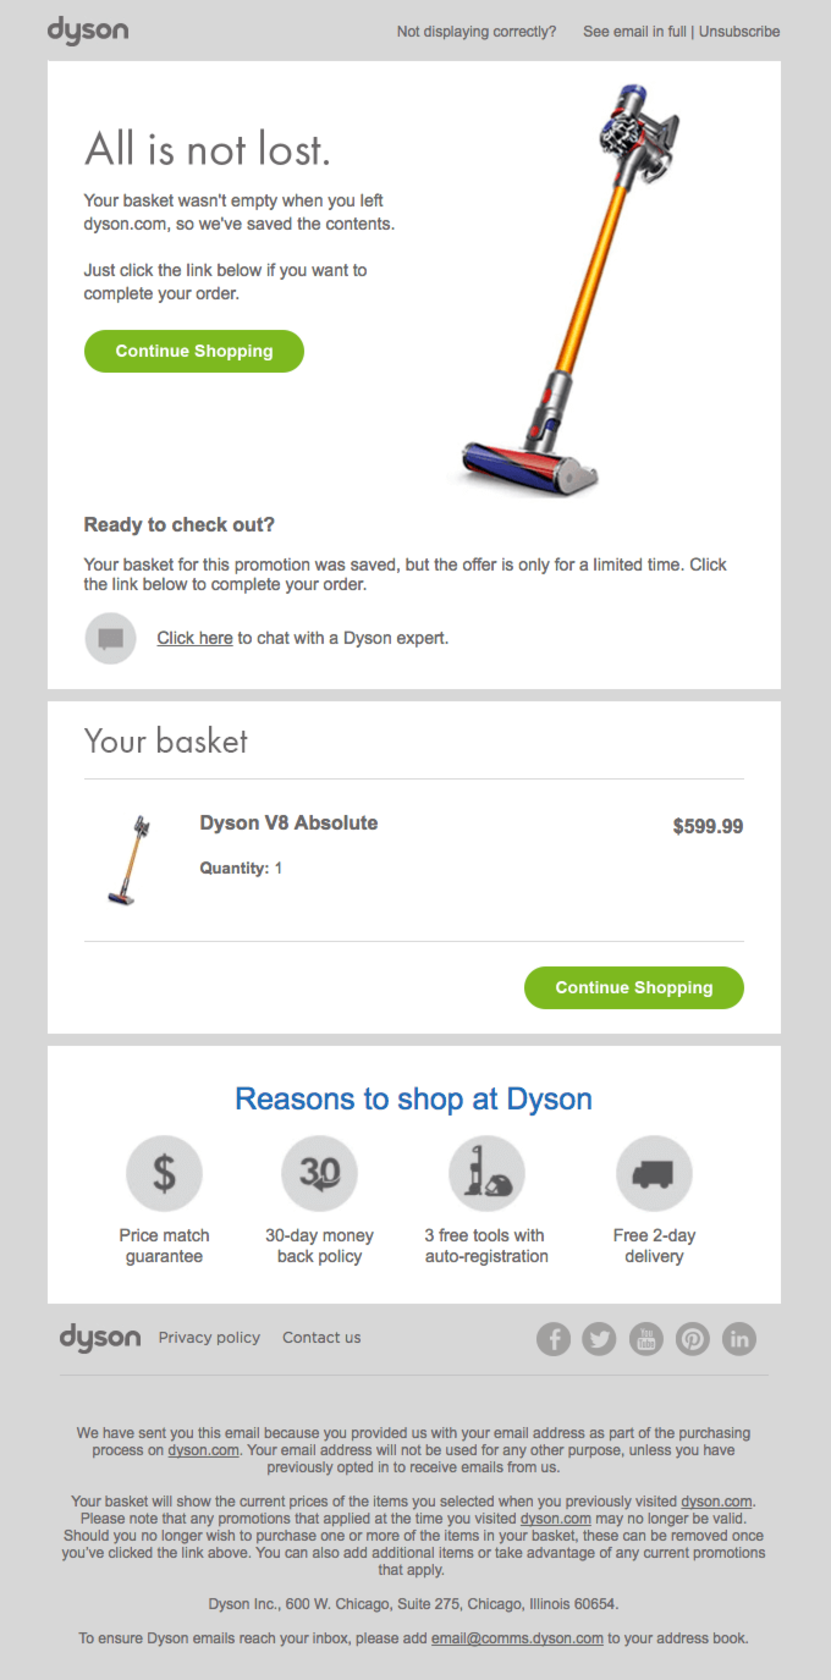 Dyson's cart abandonment email